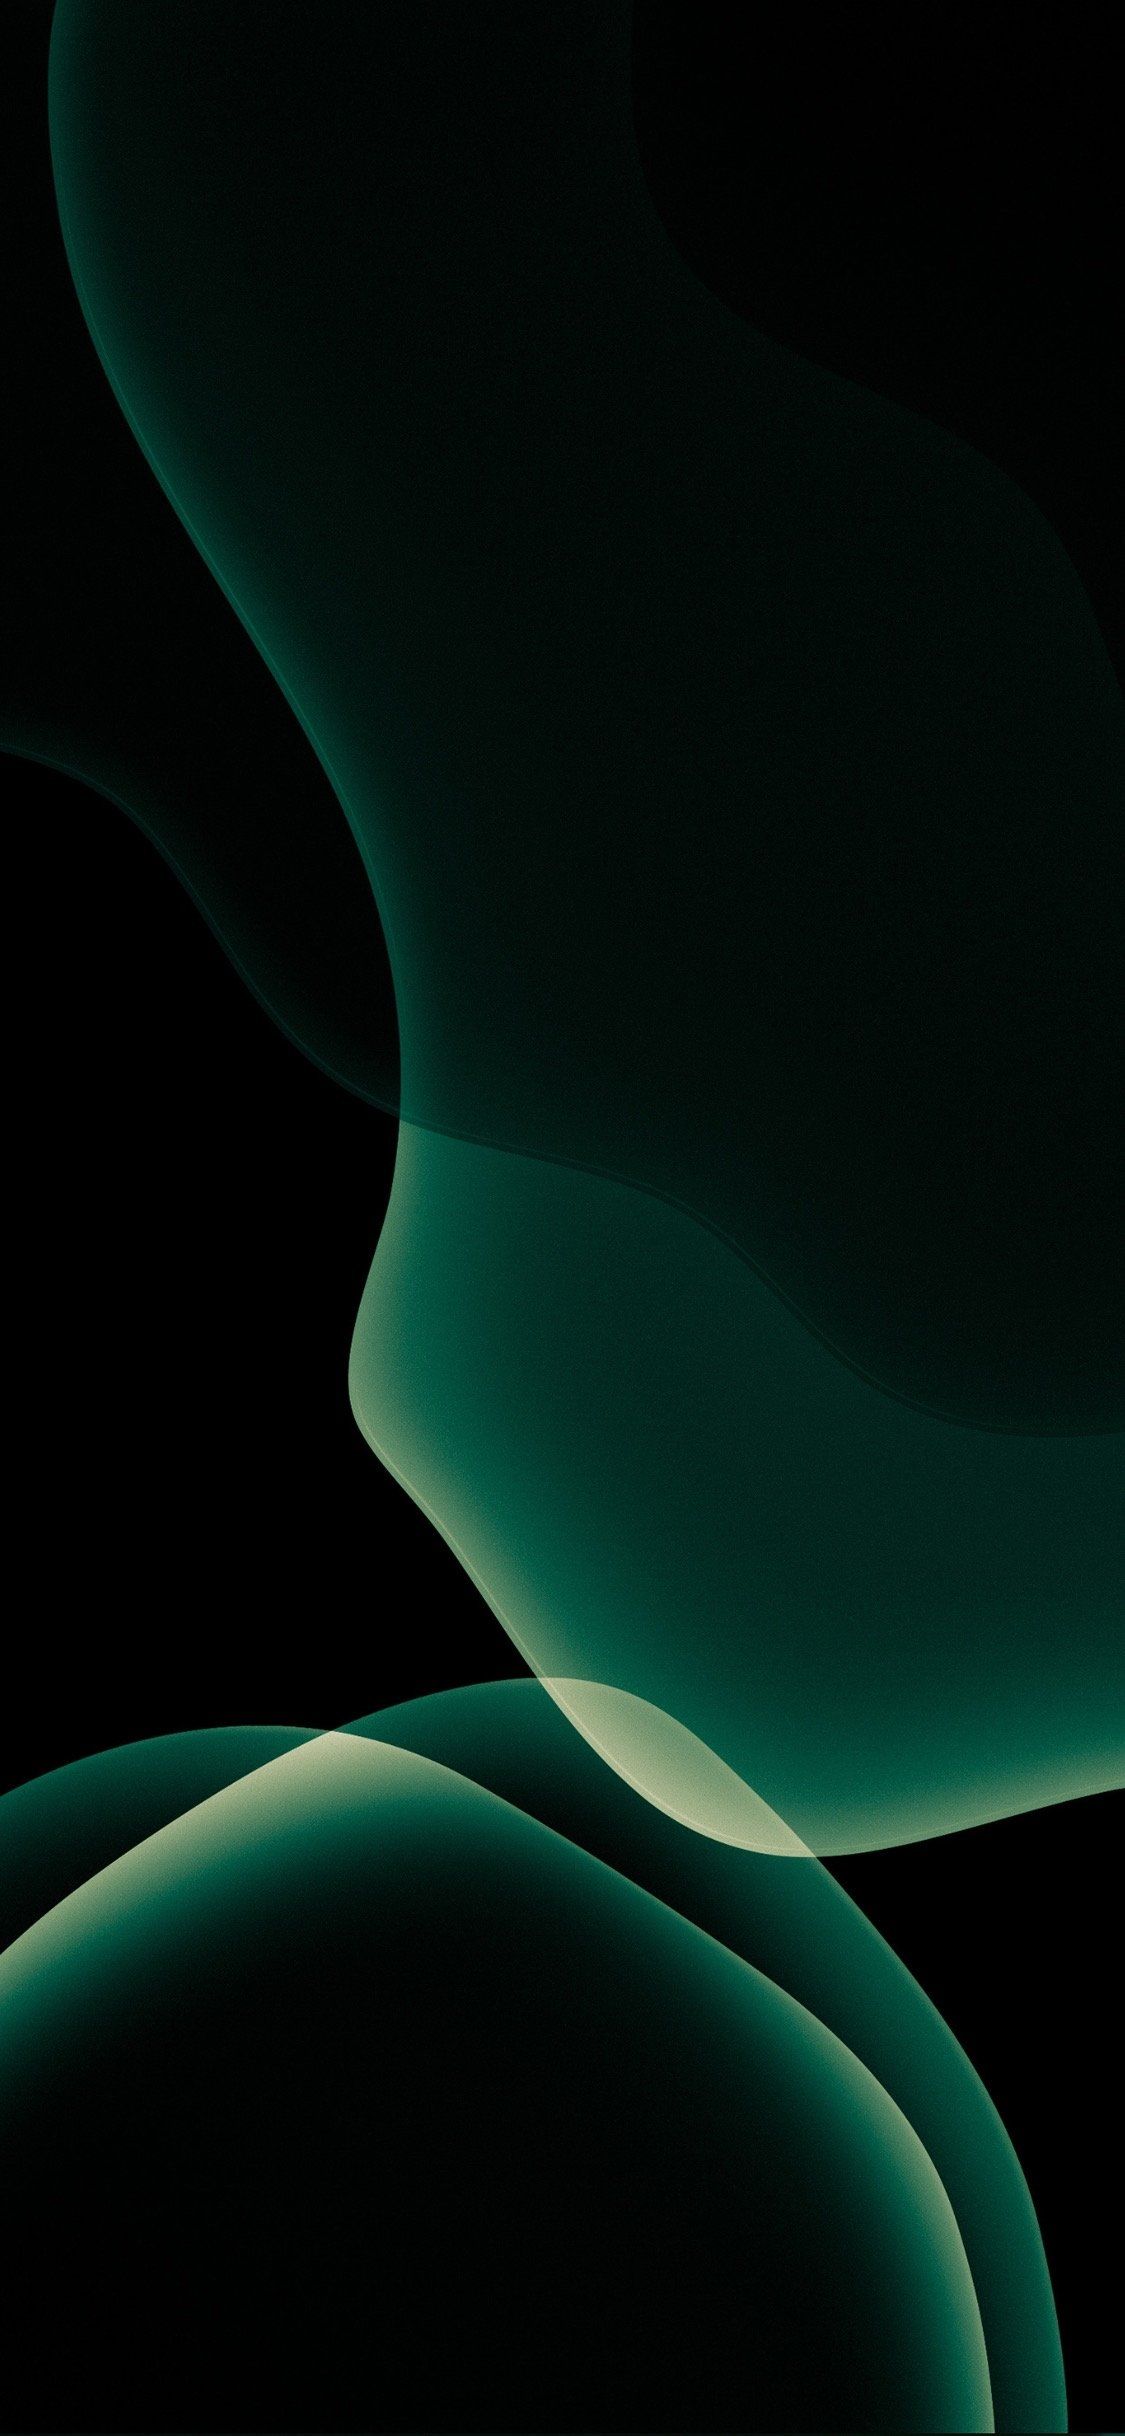 Trippy Iphone 11 Pro Wallpapers